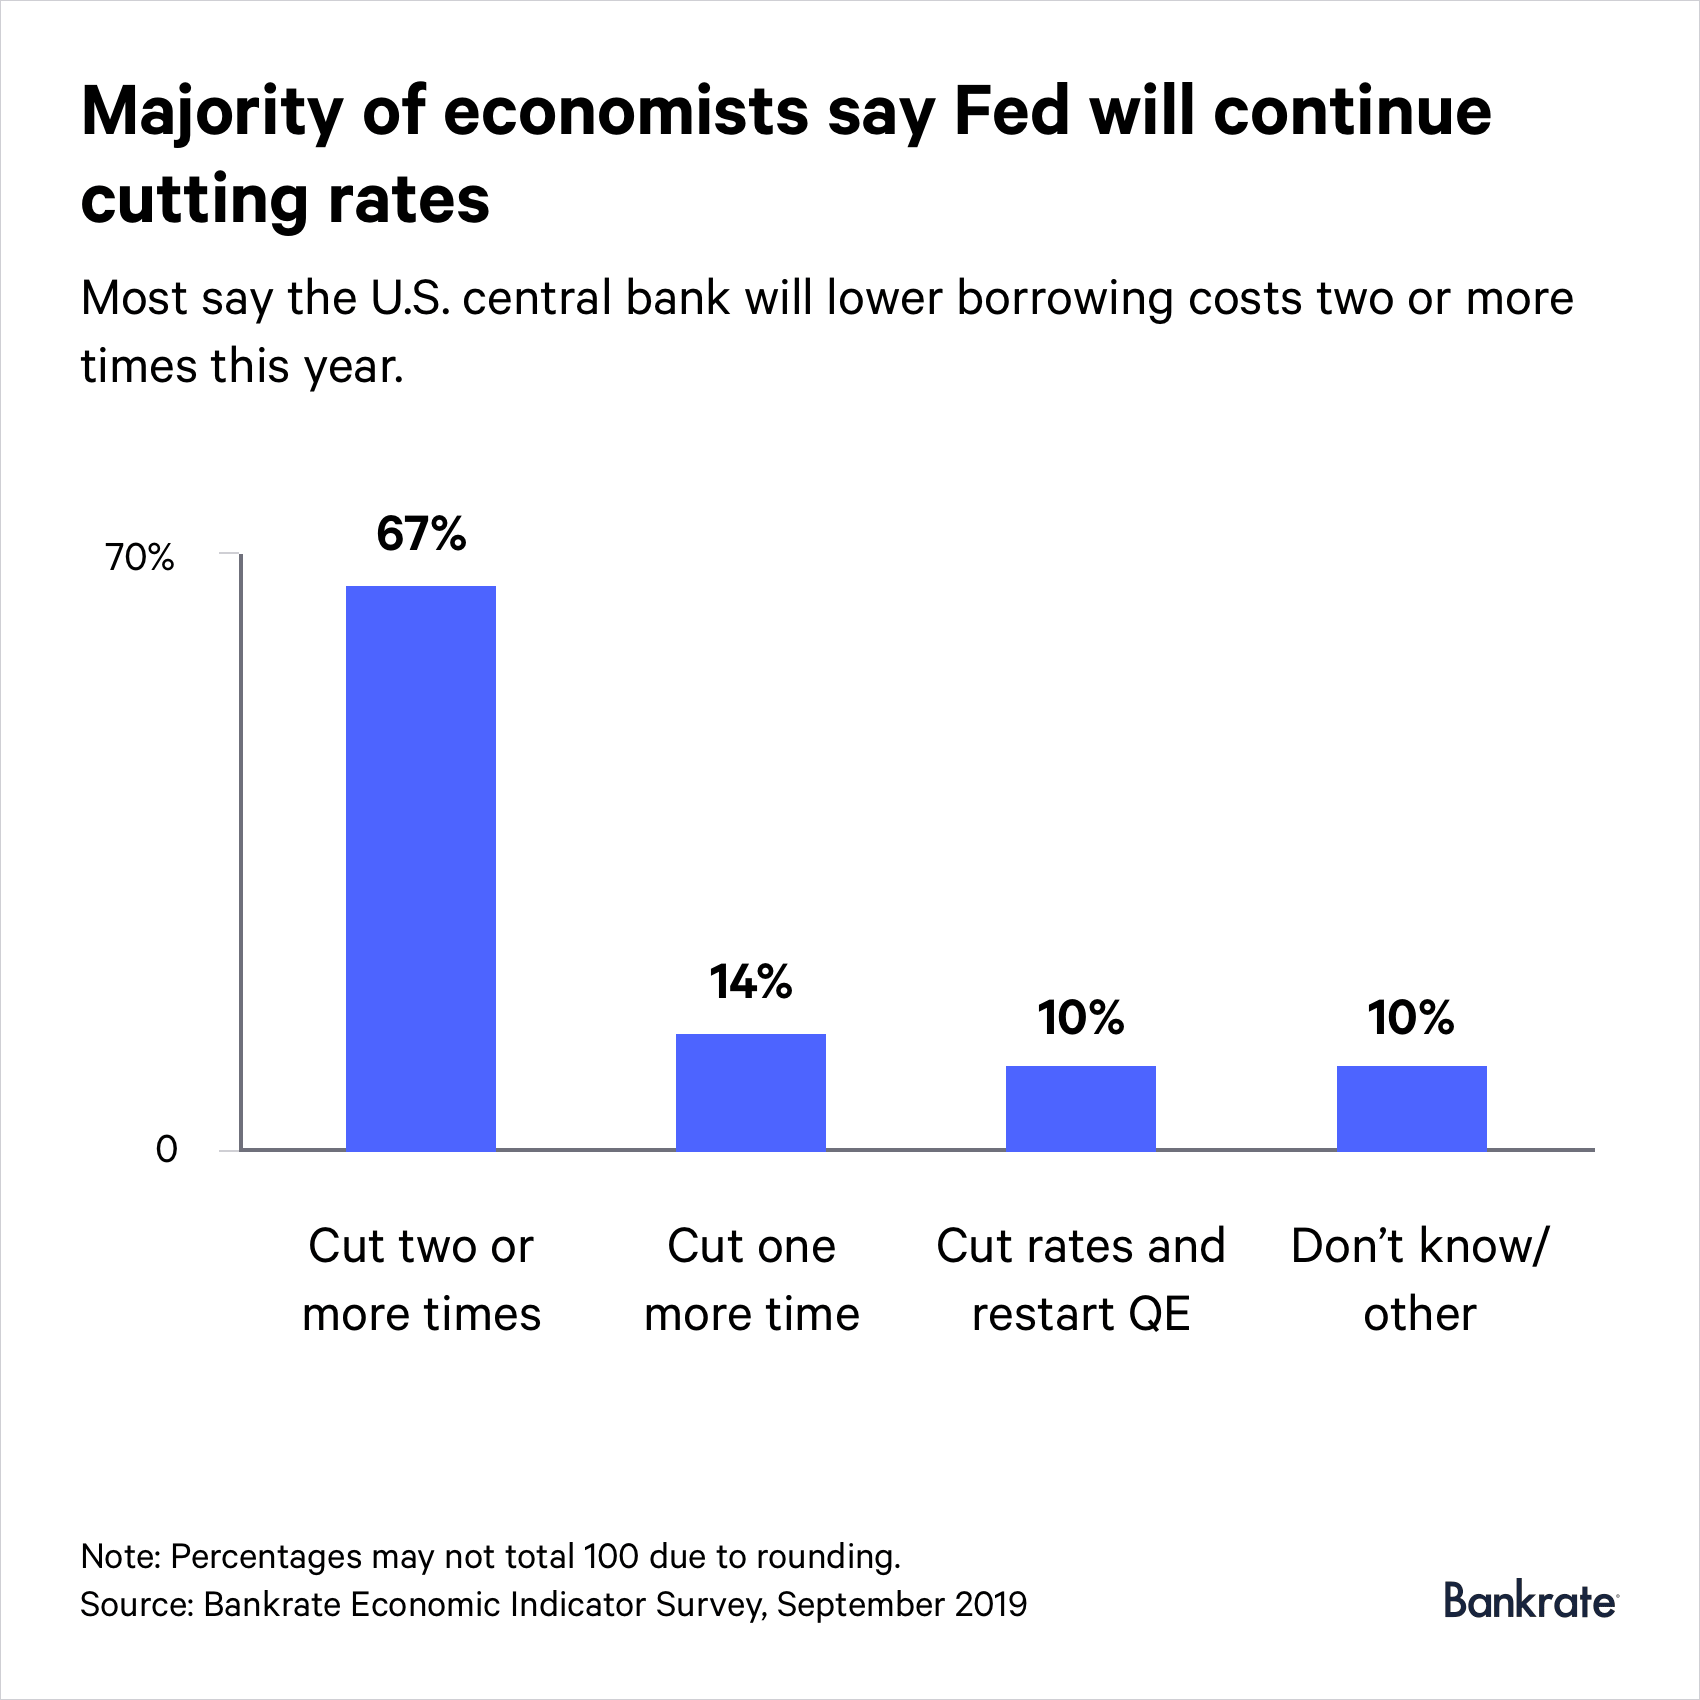 Economists' forecast for Federal Reserve policy over the next 12 months